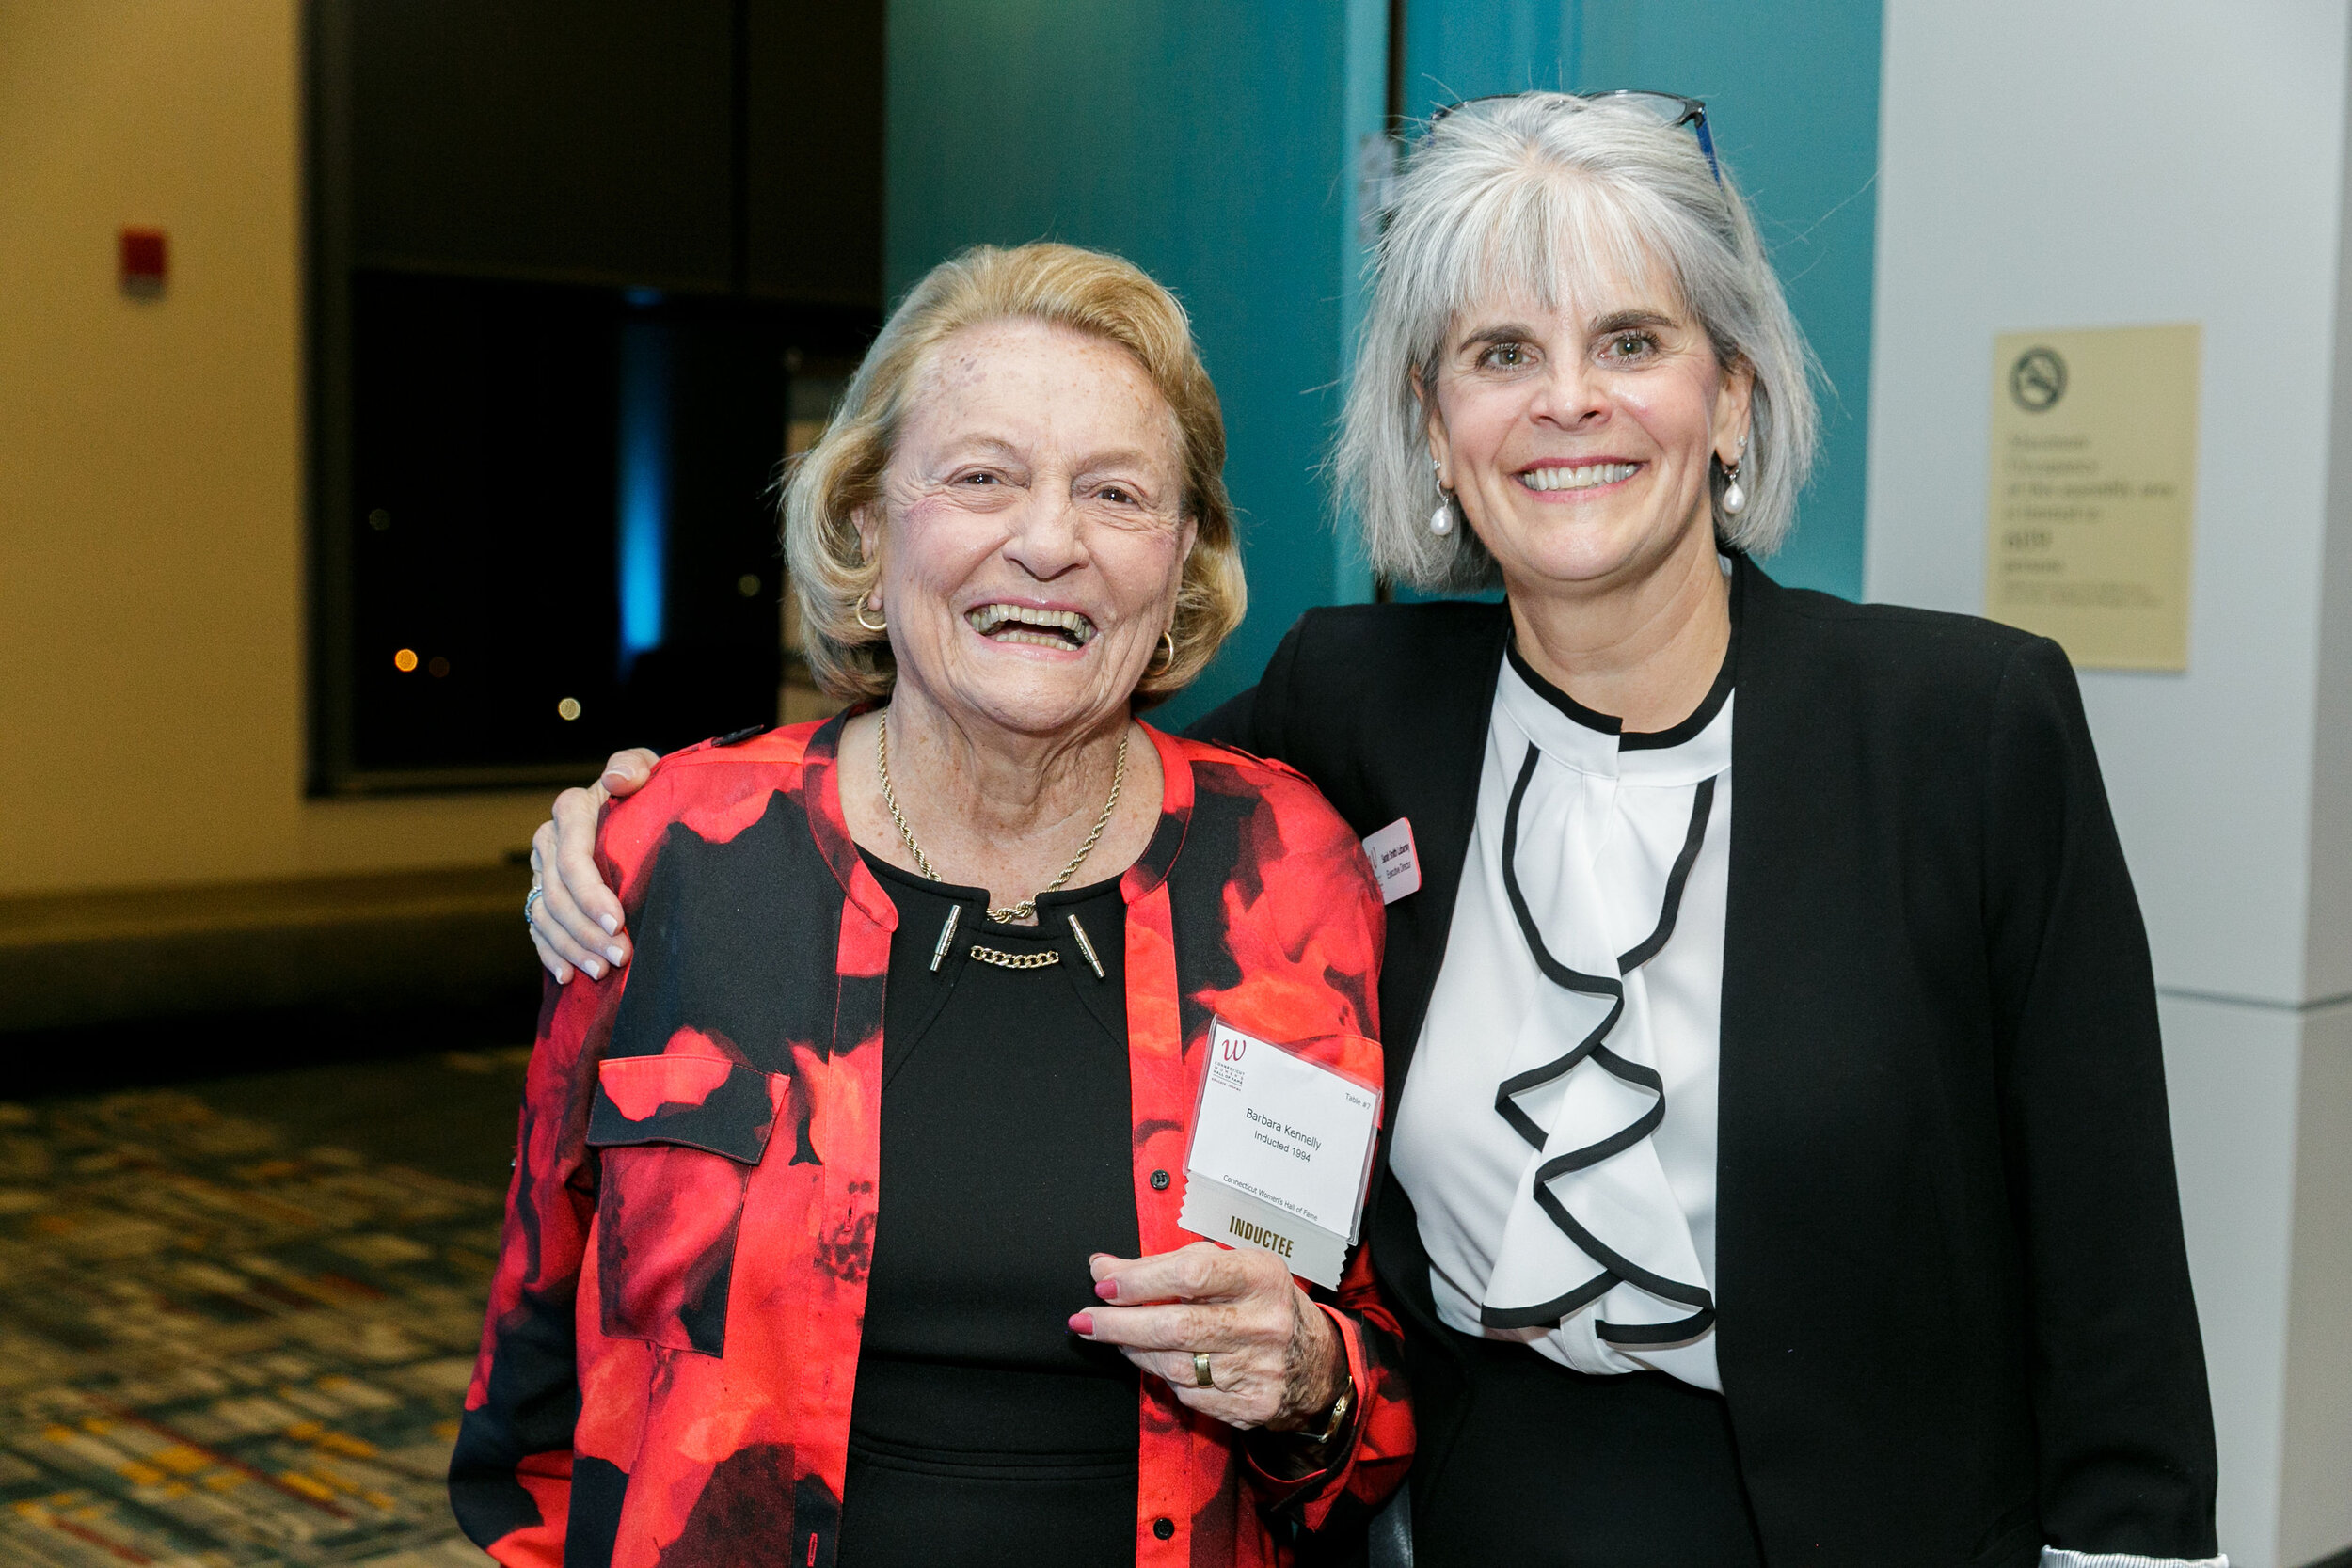   CWHF Inductee Barbara Kennelly with CWHF Executive Director, Sarah Lubarsky  